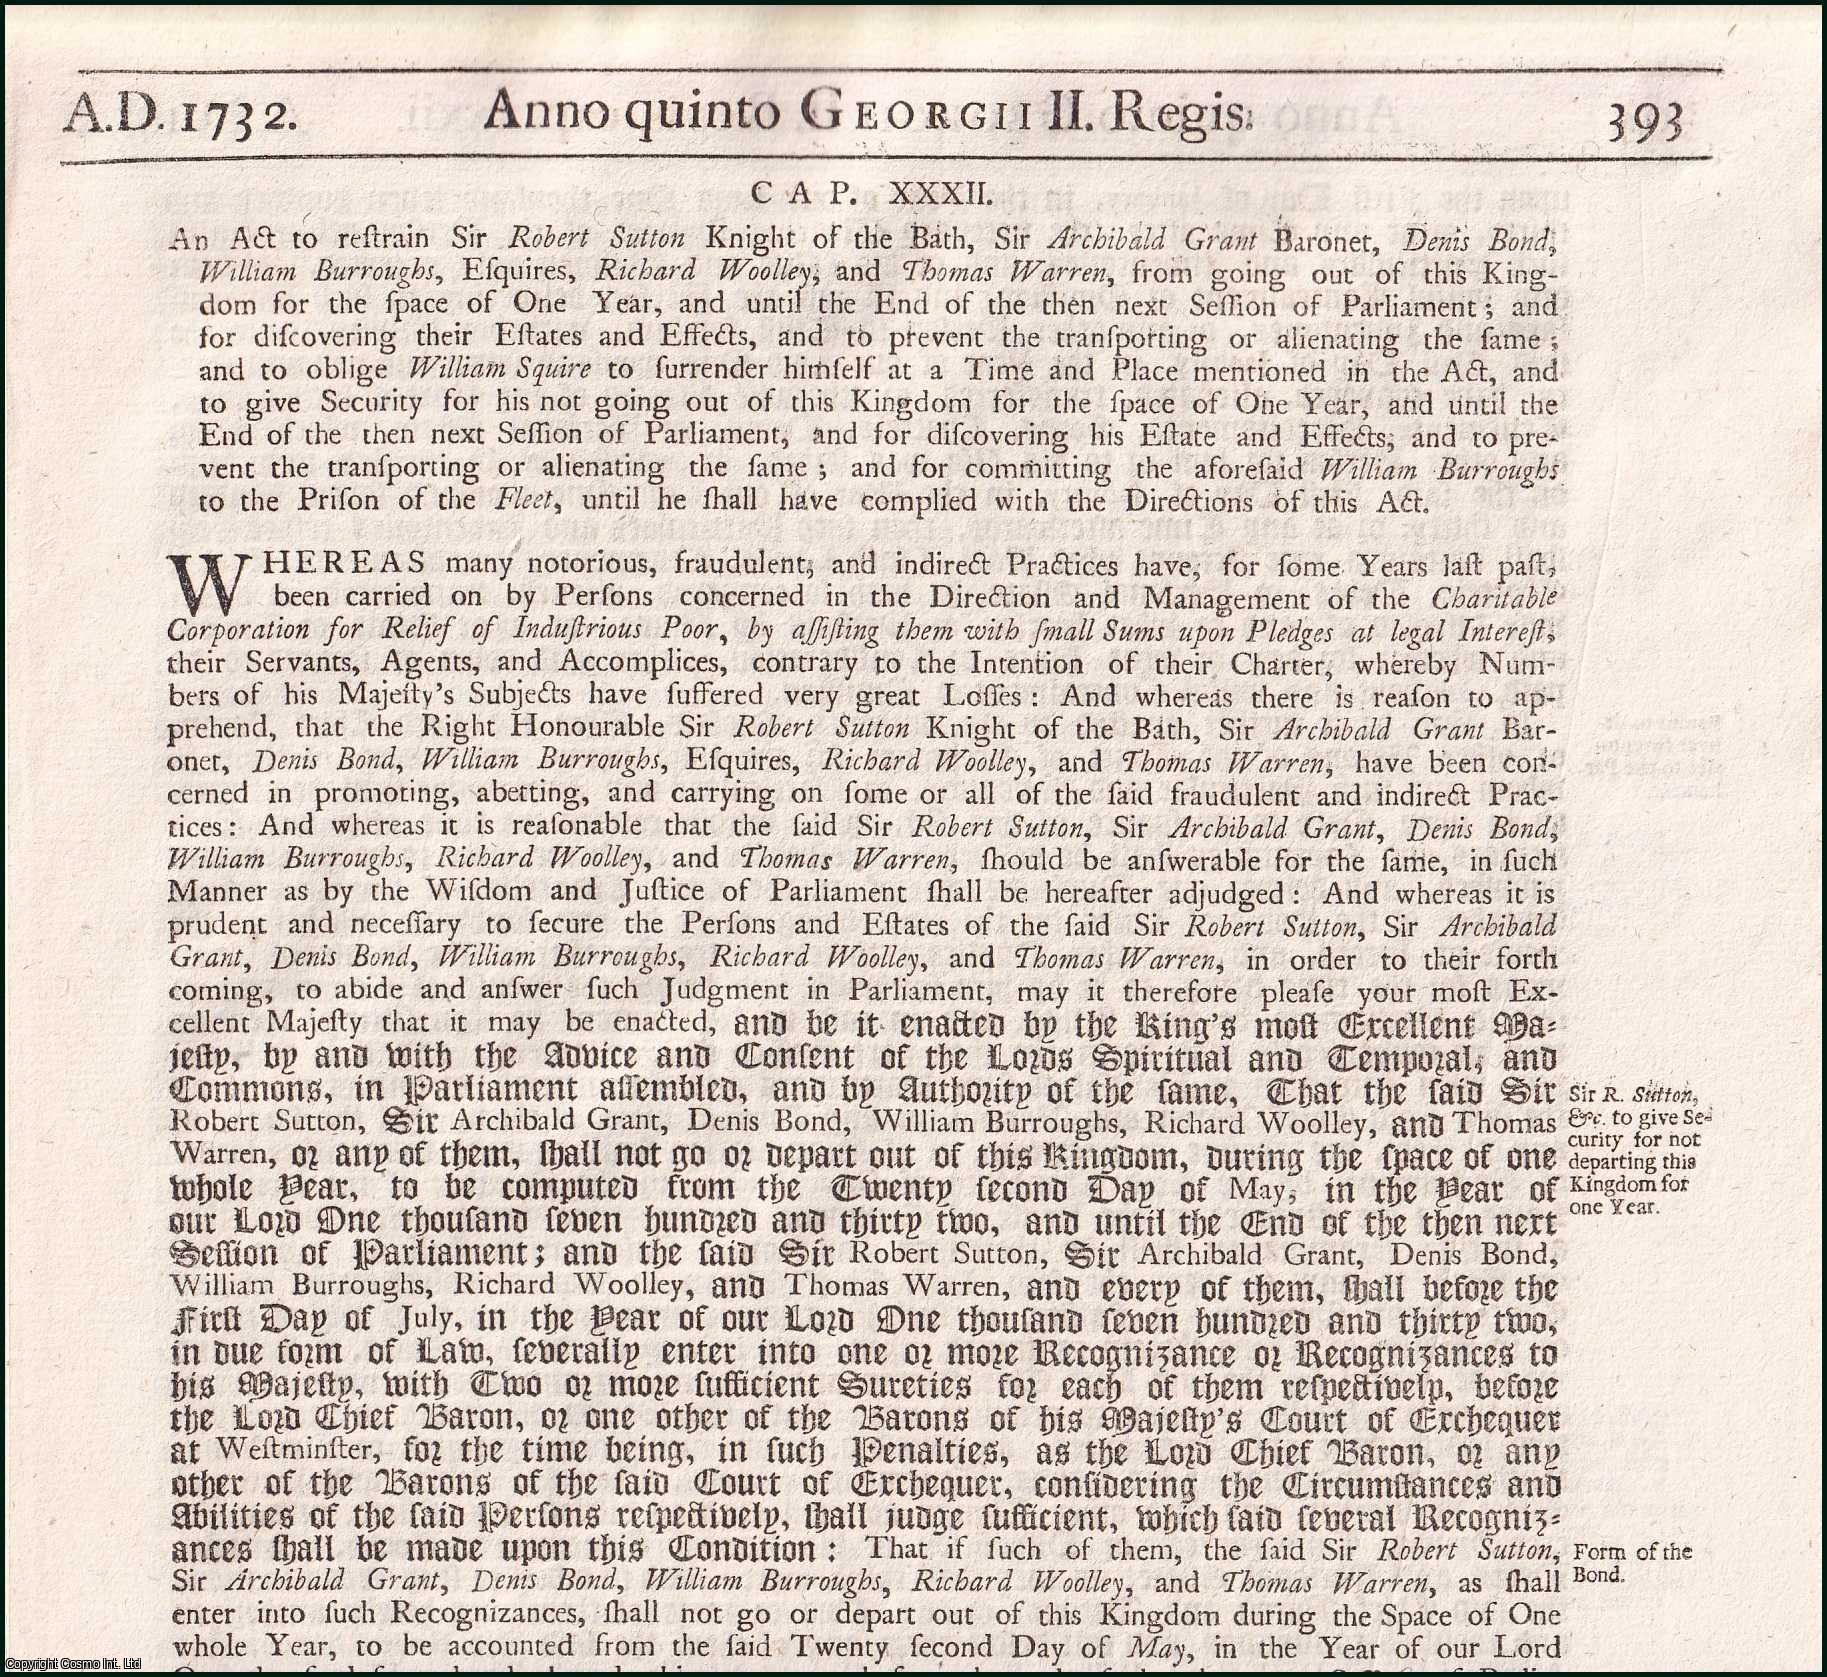 King George II - Sir Robert Sutton, etc., Restrained from Going Abroad Act 1731. An Act to restrain Sir Robert Sutton Knight of the Bath, Sir Archibald Grant Baronet, Denis Bond, William Burroughs, Esquires, Richard Woolley, and THomas Warren, from going out of this Kingdom for the space of One Year, and until the End of the then next.